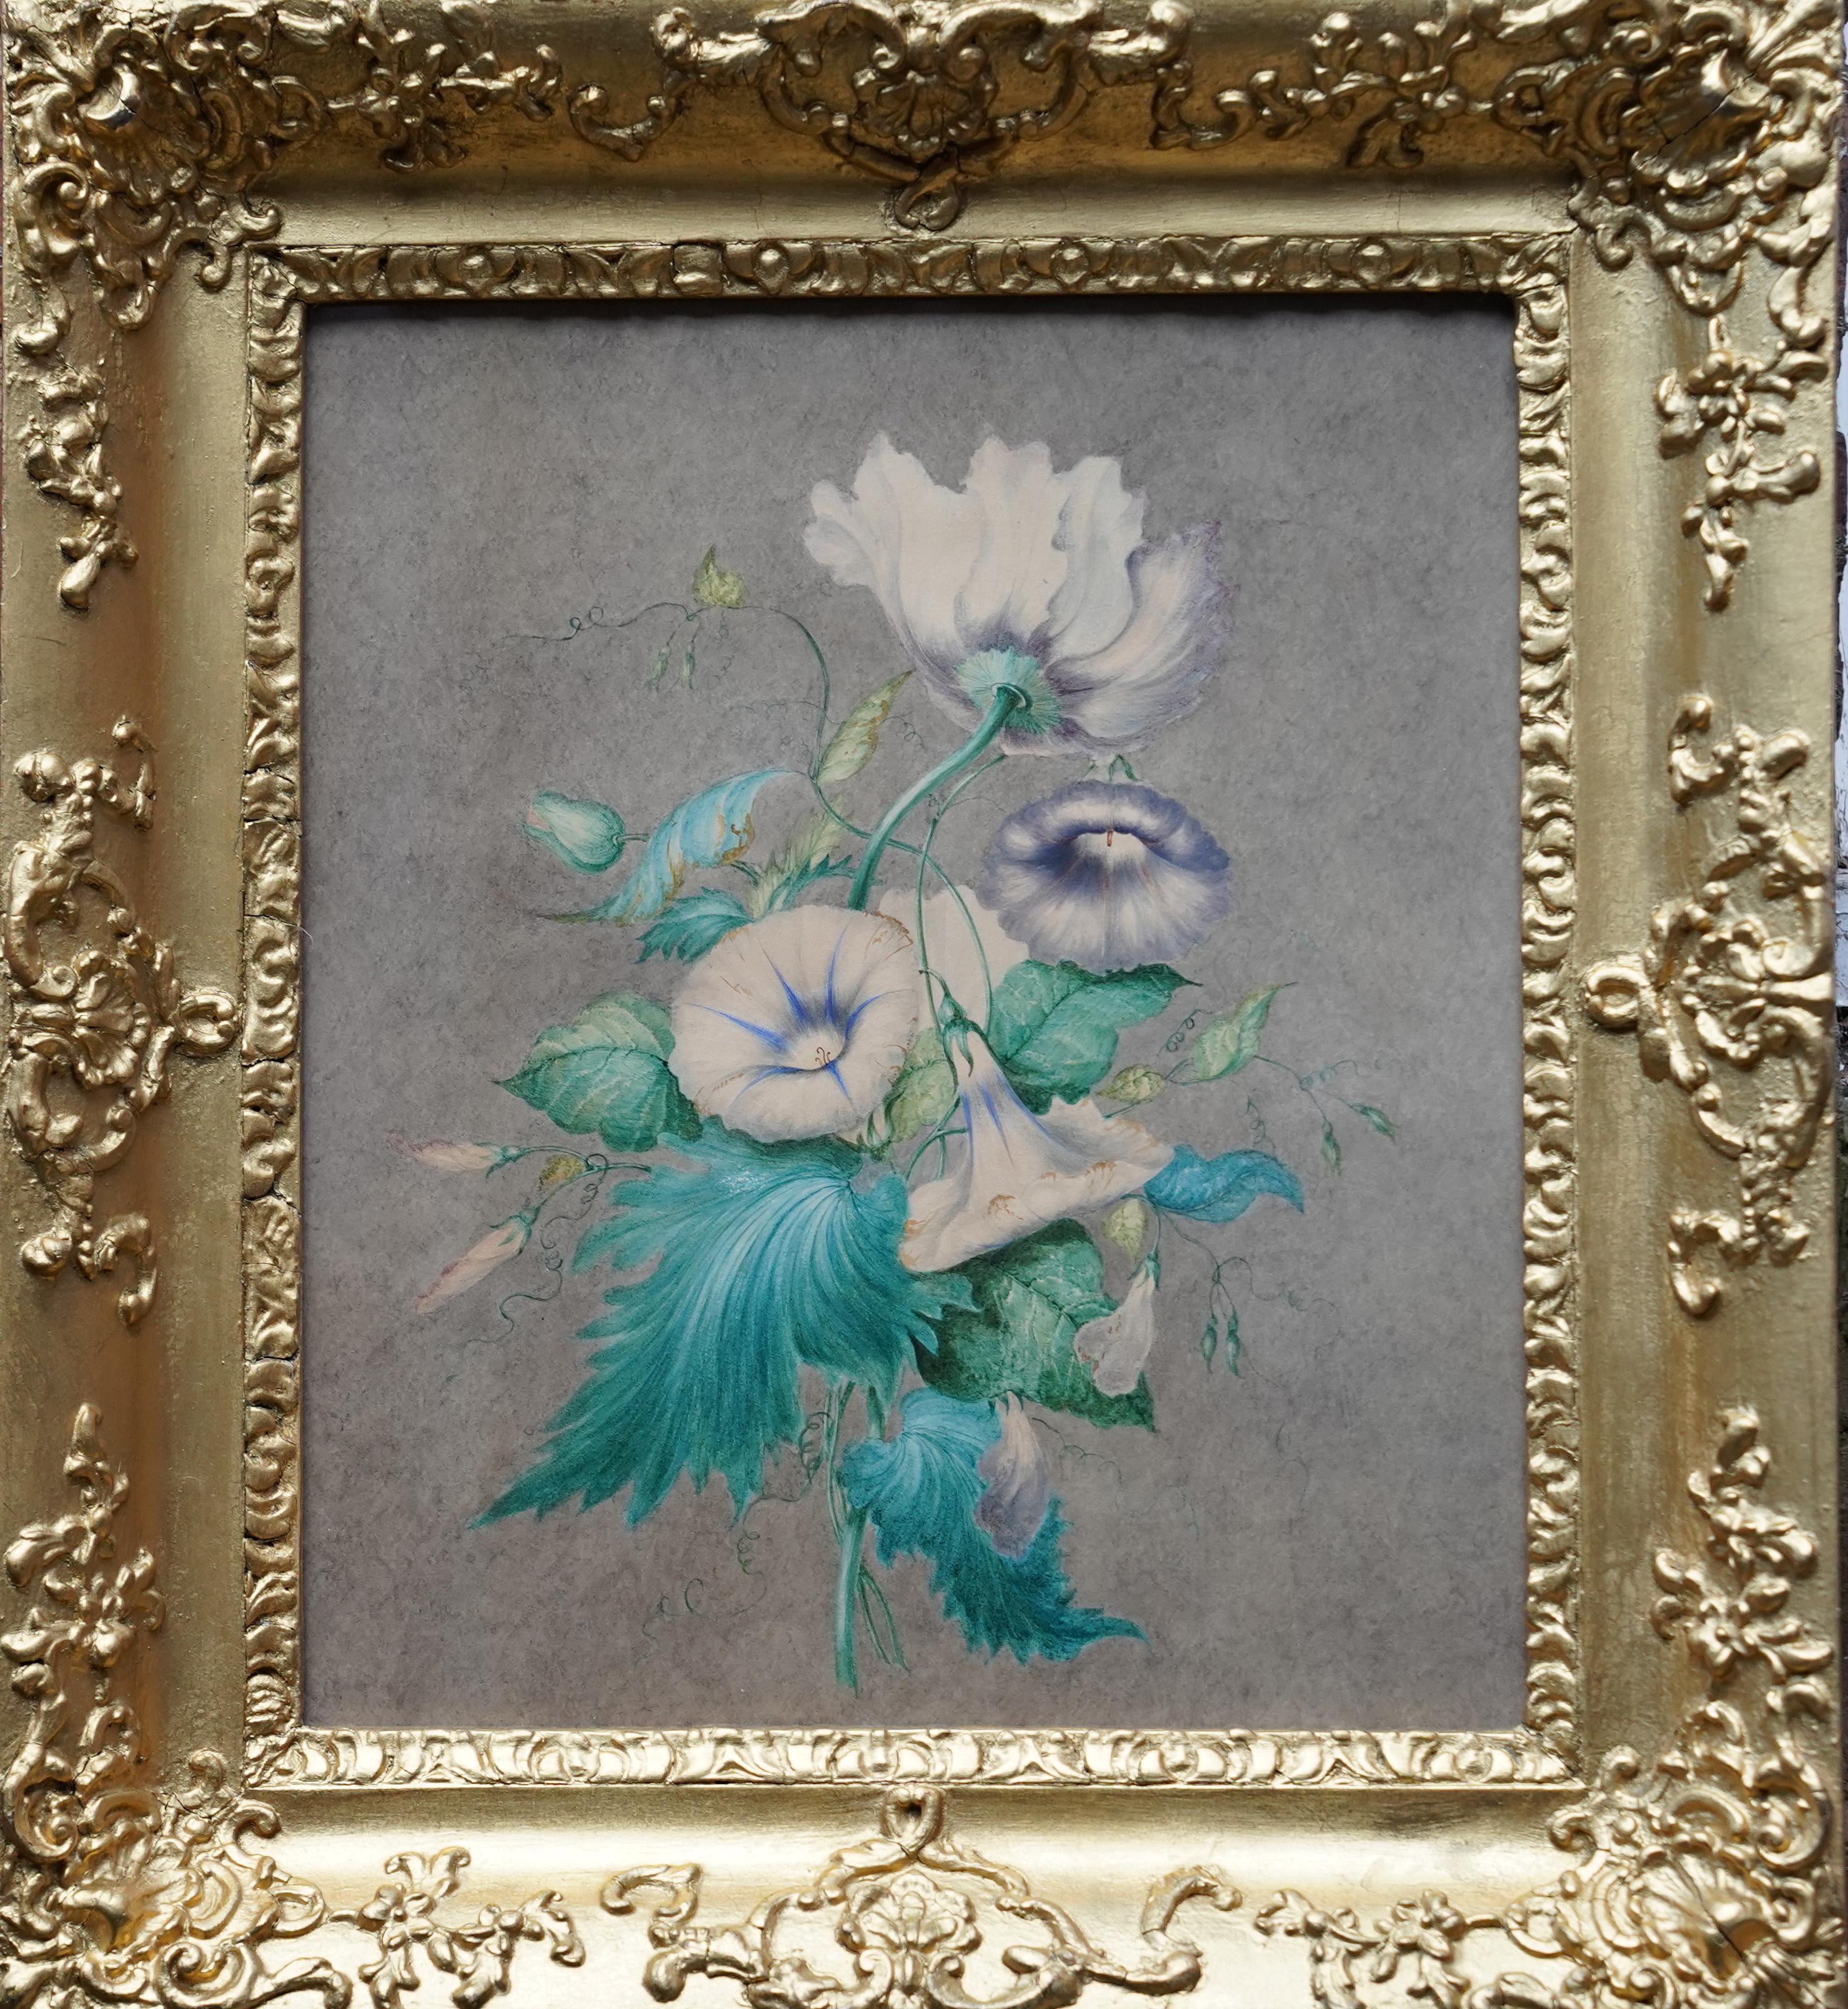 Unknown Still-Life - Morning Glory and Poppy Floral - British art Old Master flower painting W/C